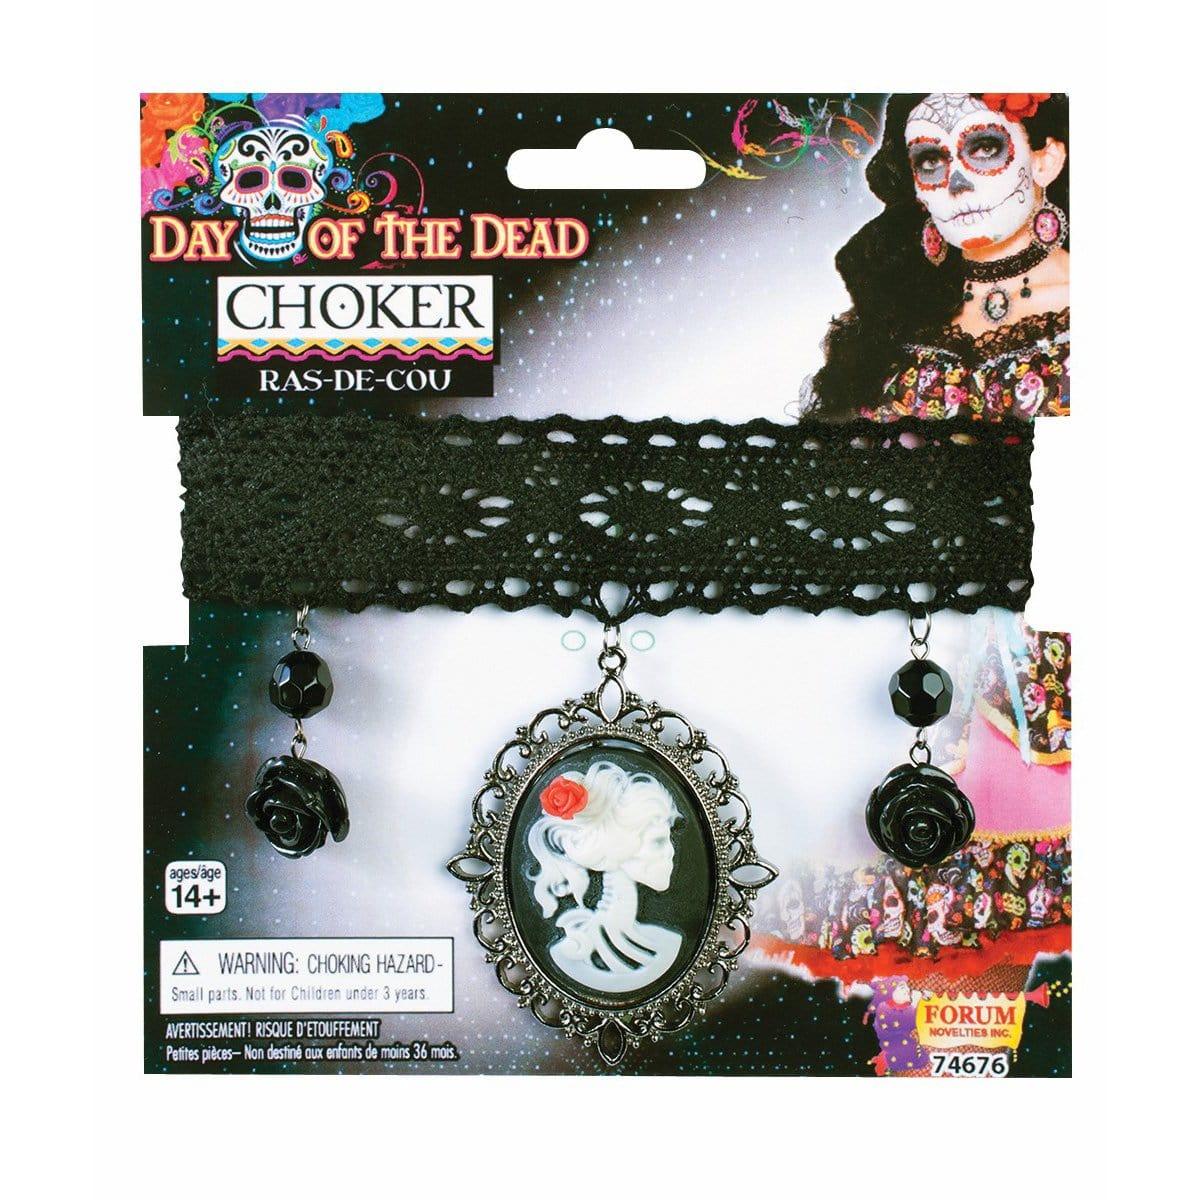 Buy Costume Accessories Day of the dead cameo choker sold at Party Expert